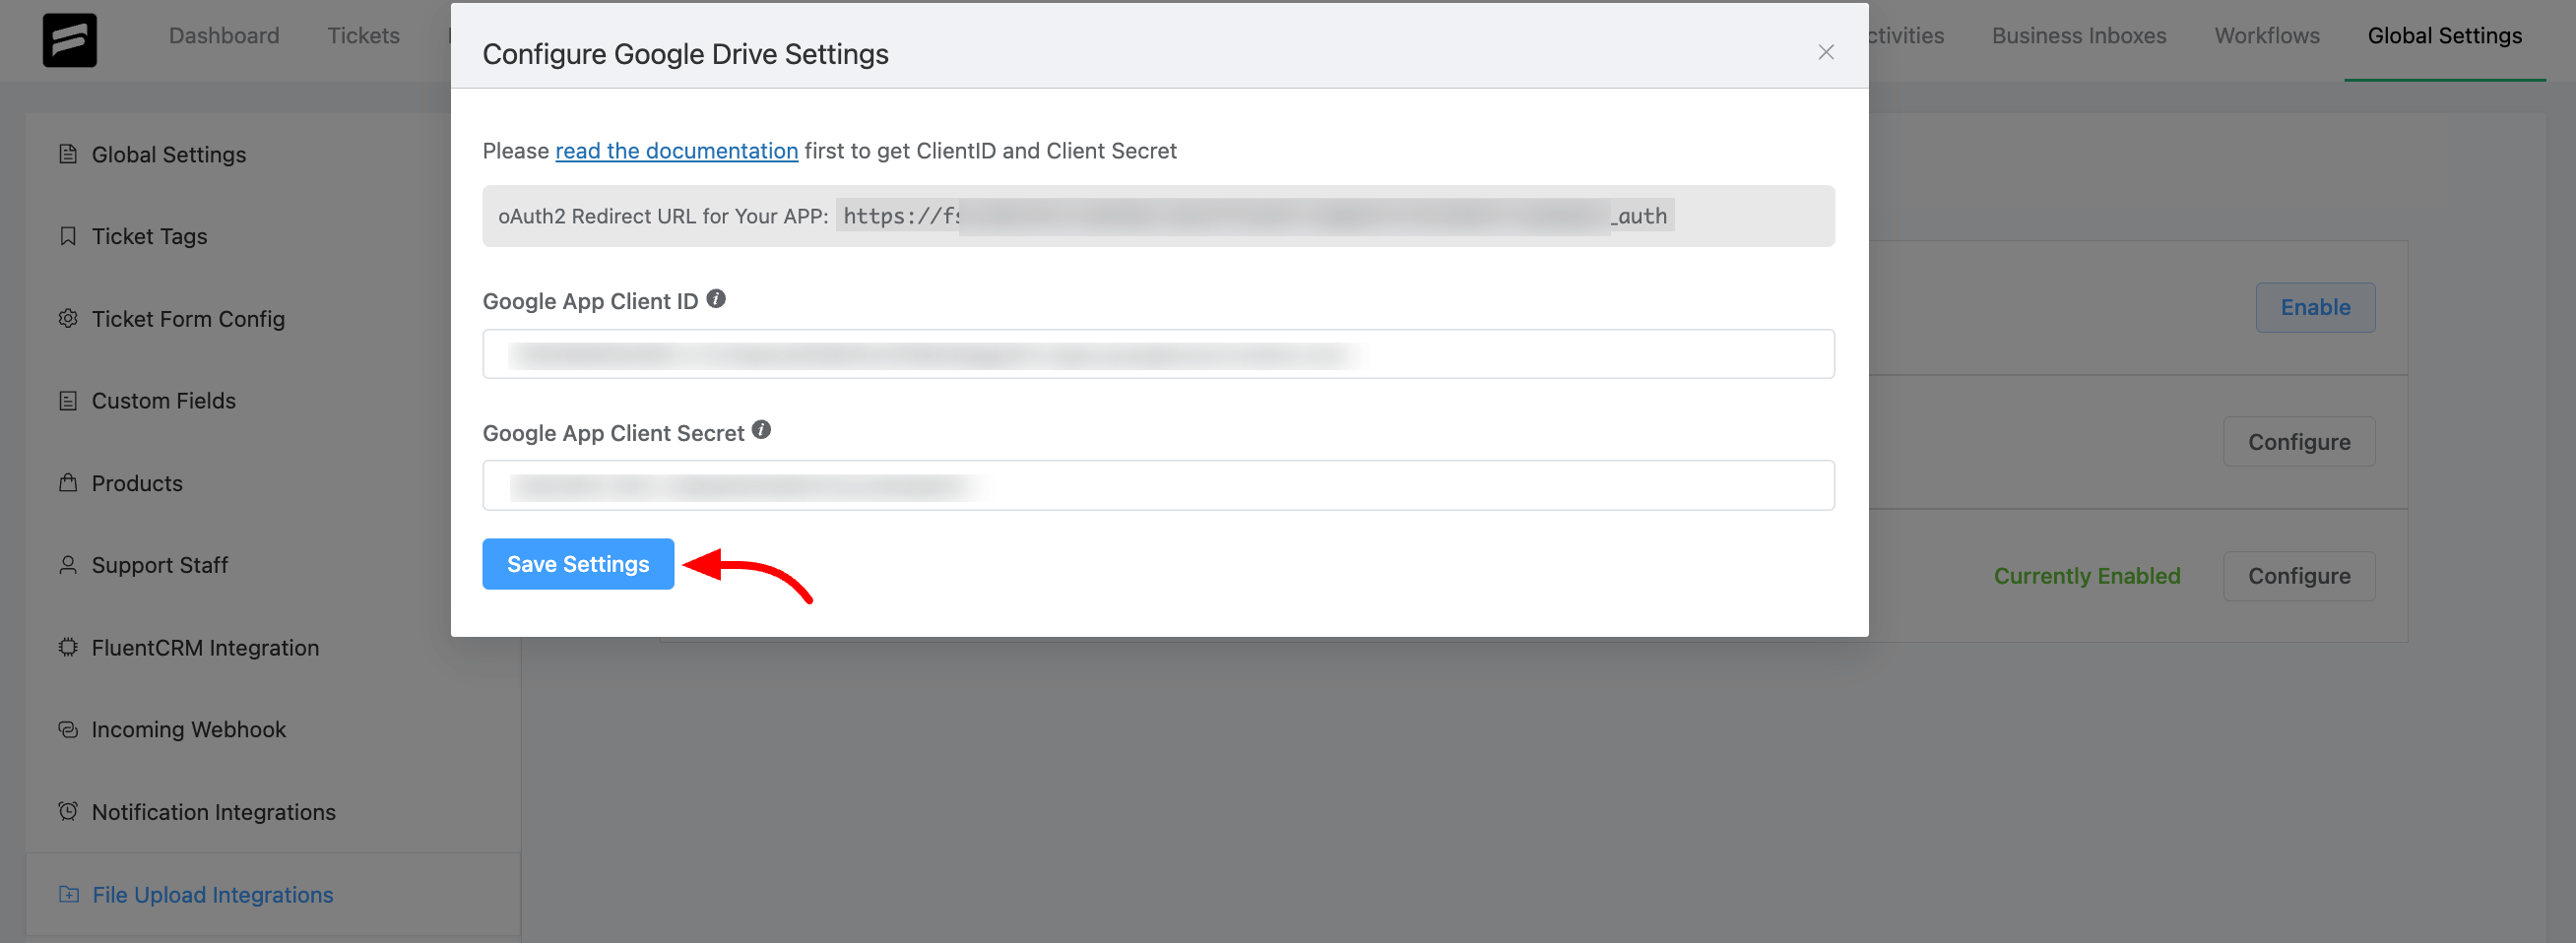 Configure Google Drive Settings - Save Settings - Integration with Fluent Support